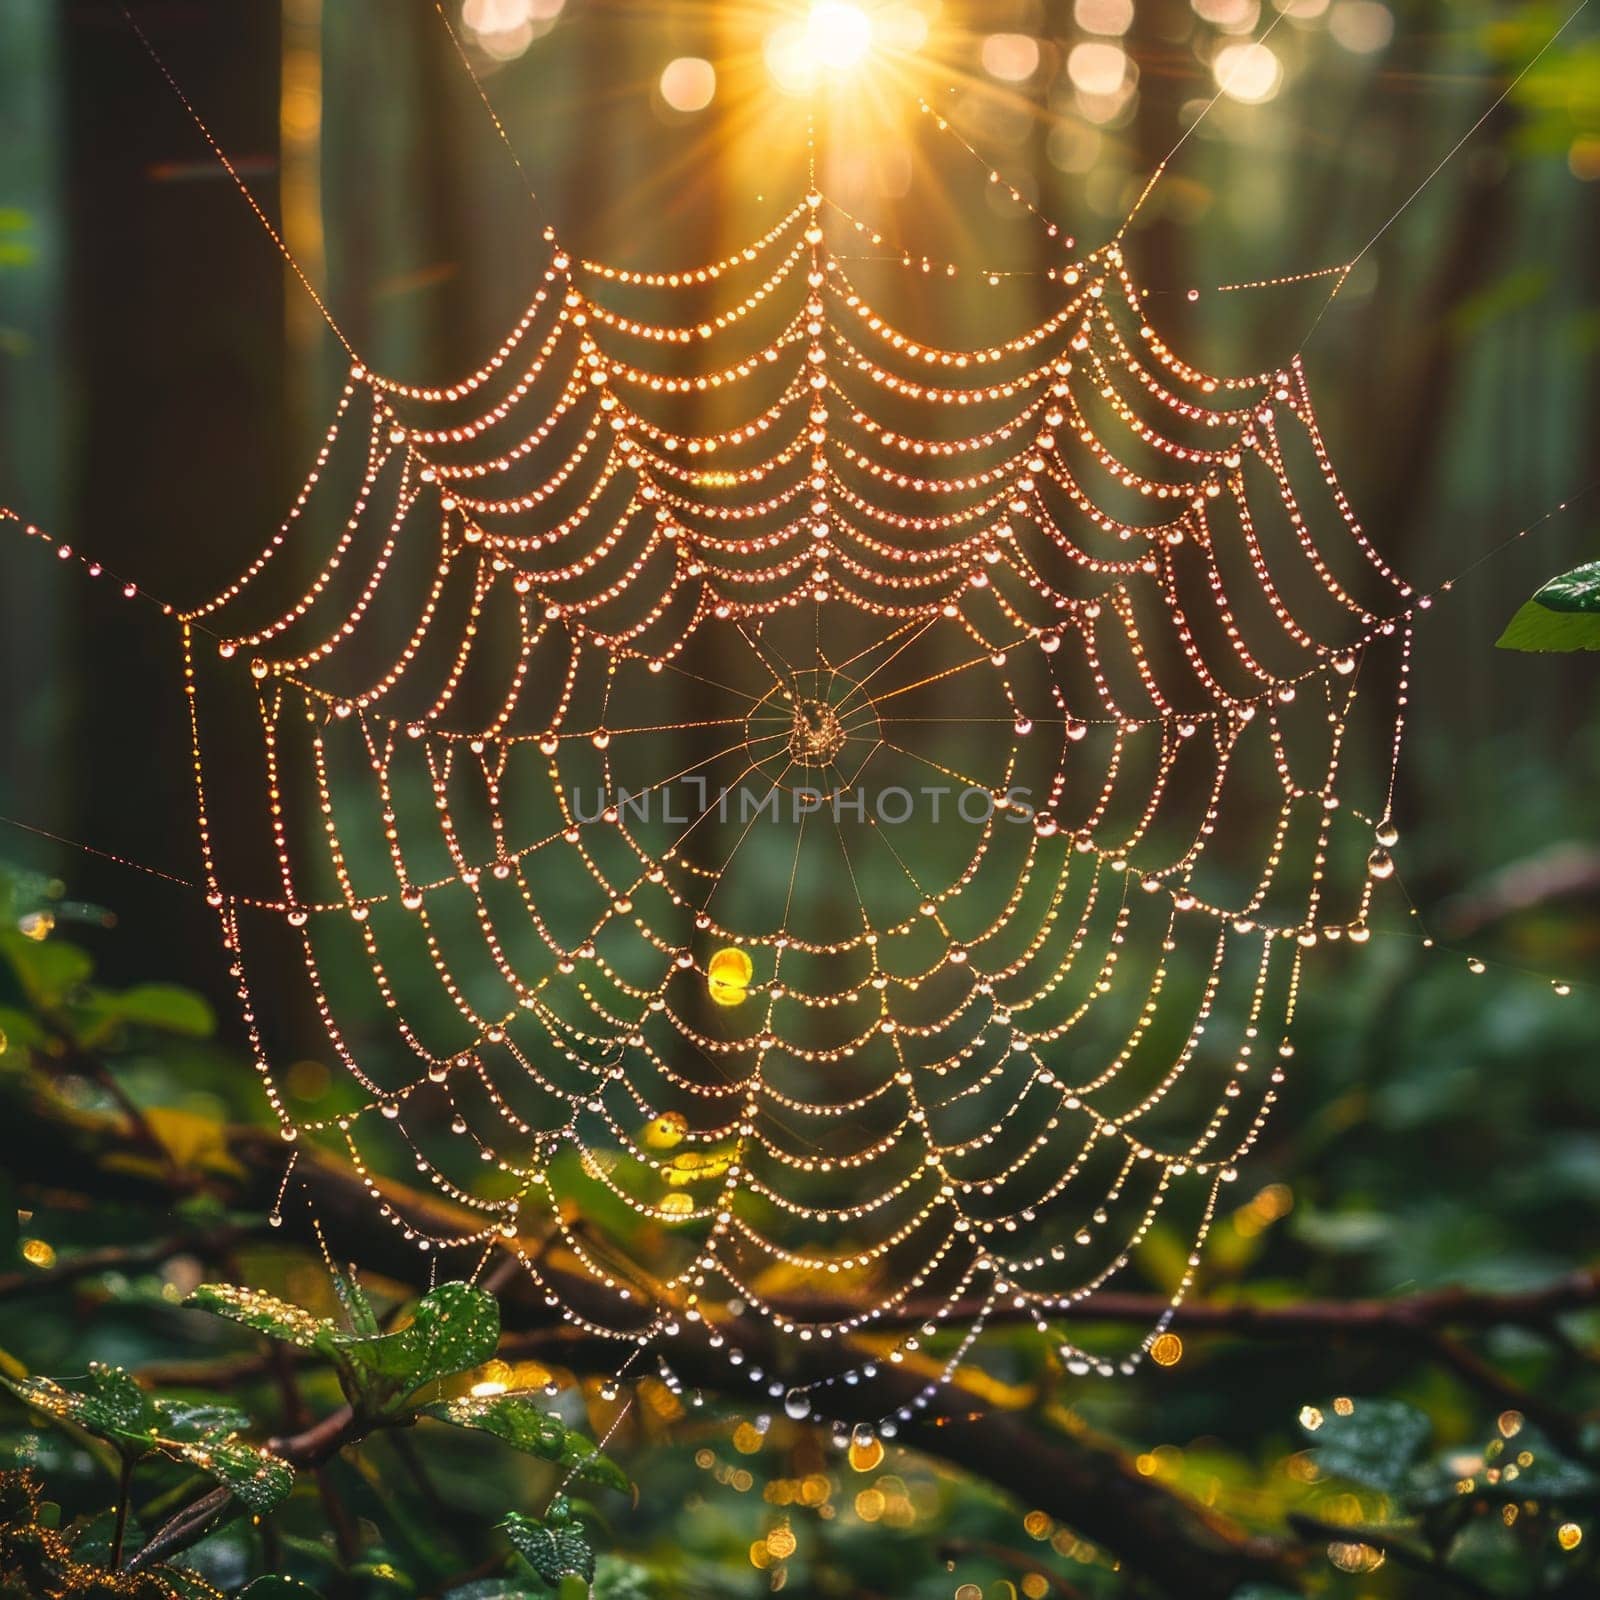 A delicate spider web glistens in the sunlight, suspended in the heart of a dense forest, creating a mesmerizing masterpiece of natures artistry.